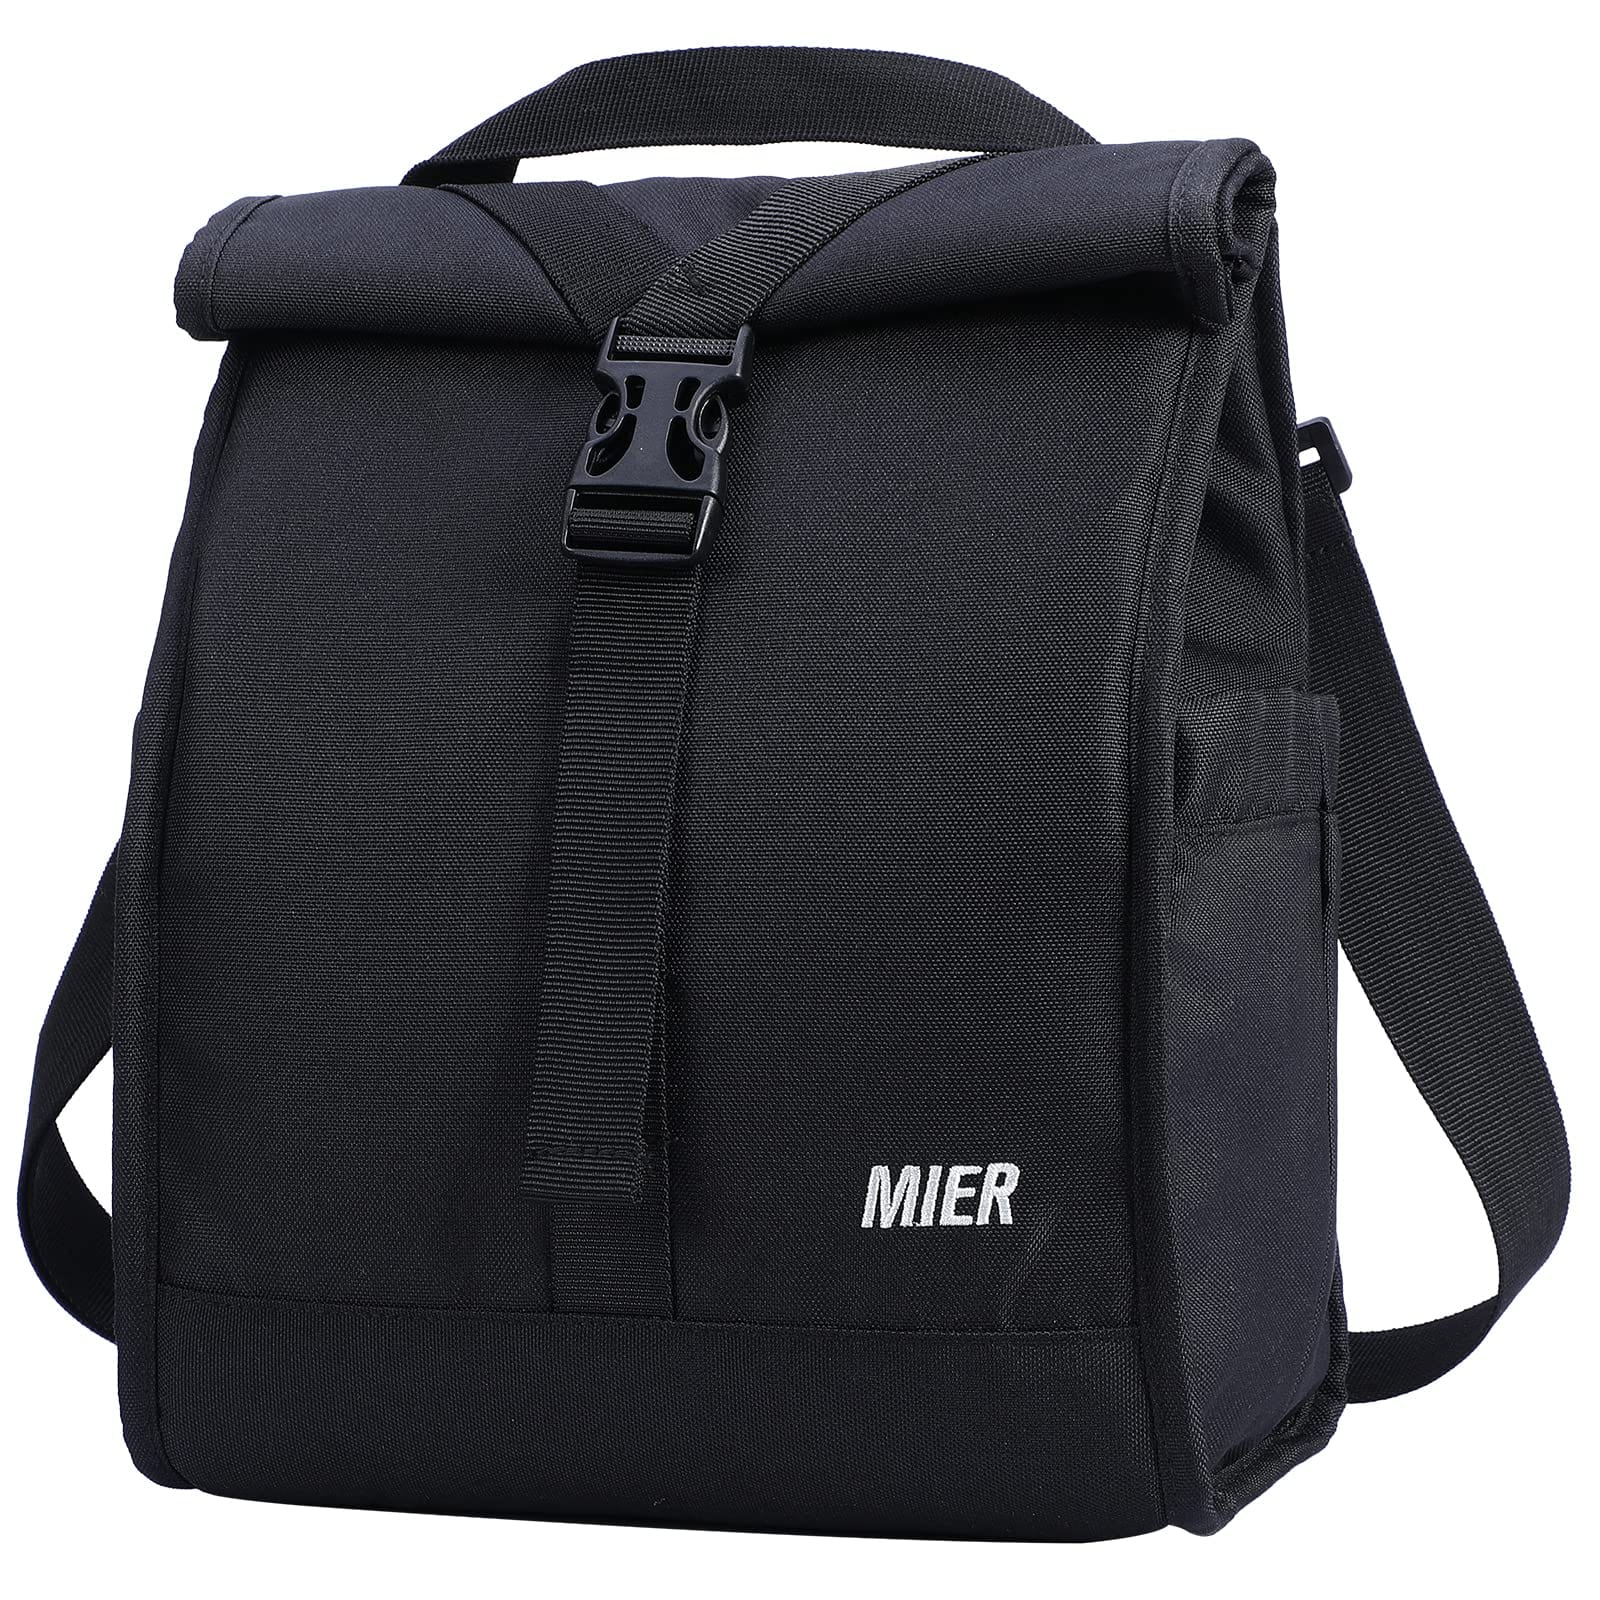 Insulated Lunch Bag Roll Top Lunch Box for Women Men Lunch Bag Black MIER